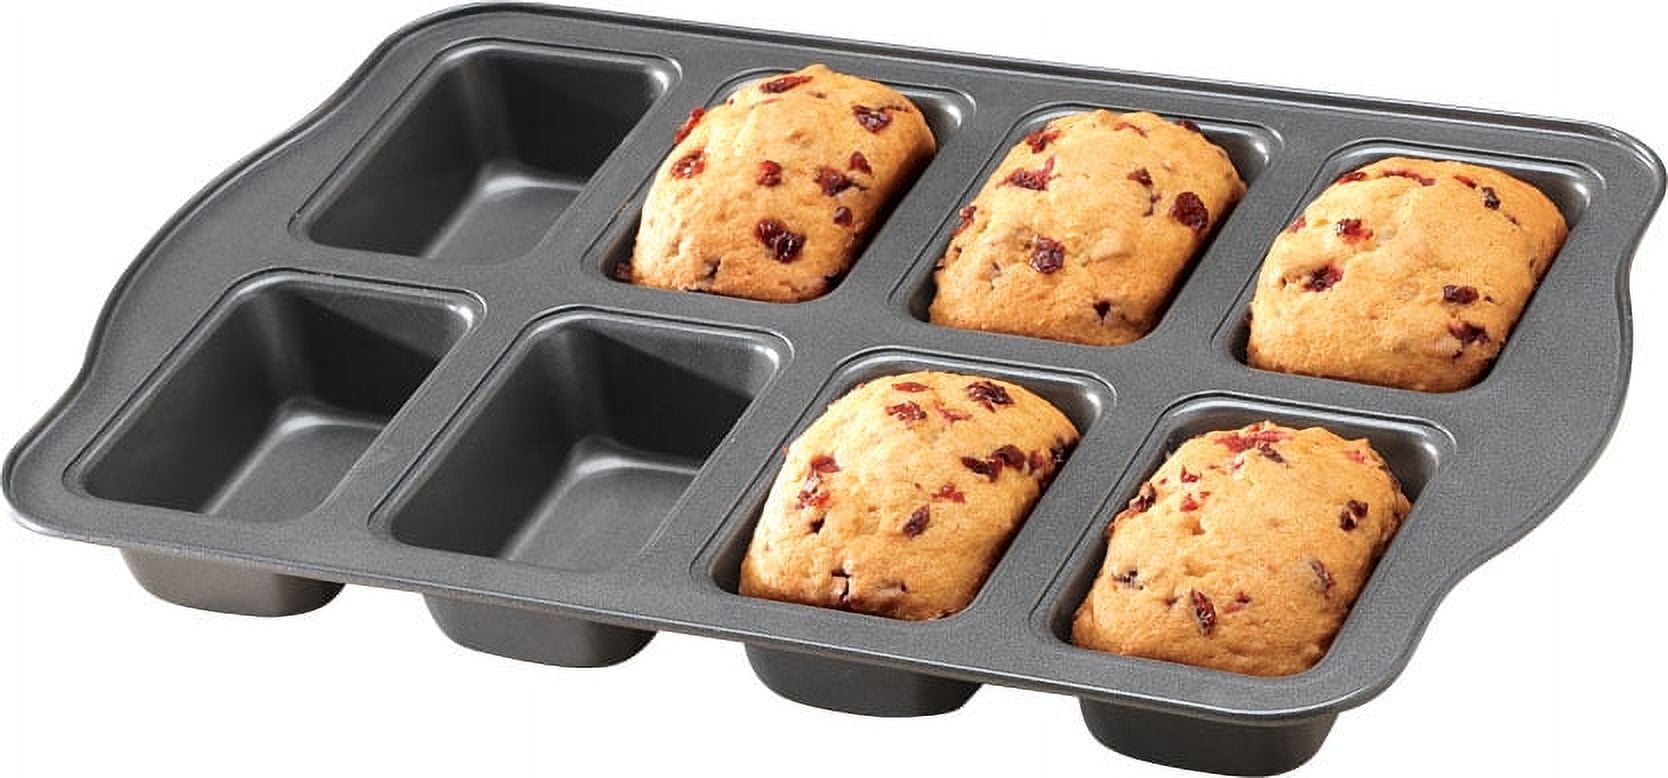 Wilton Perfect Results Non-Stick Mini Loaf Pan, 8-Cavity, 15.2 IN x 9.5 IN  x 1.6, Gray